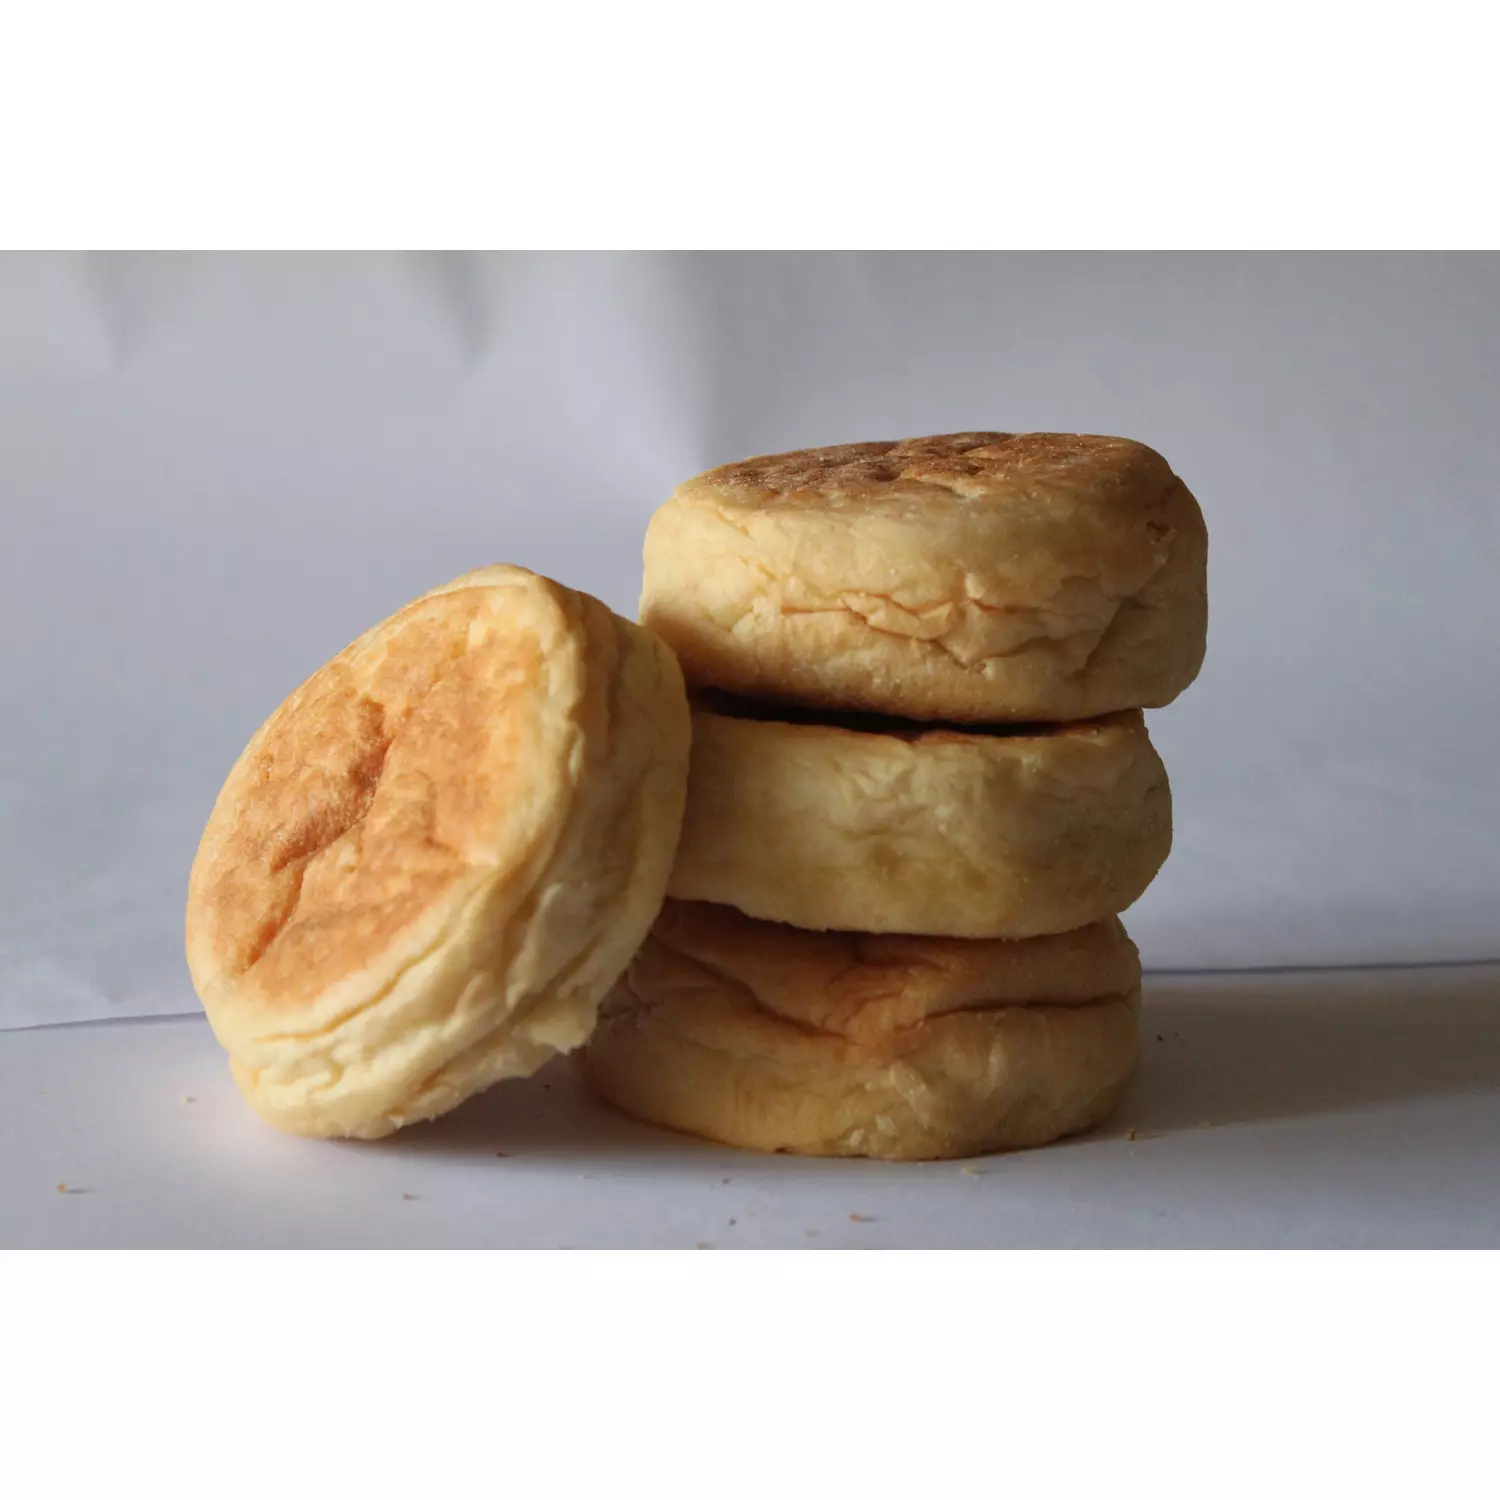 English Muffins (pack of 4) hover image